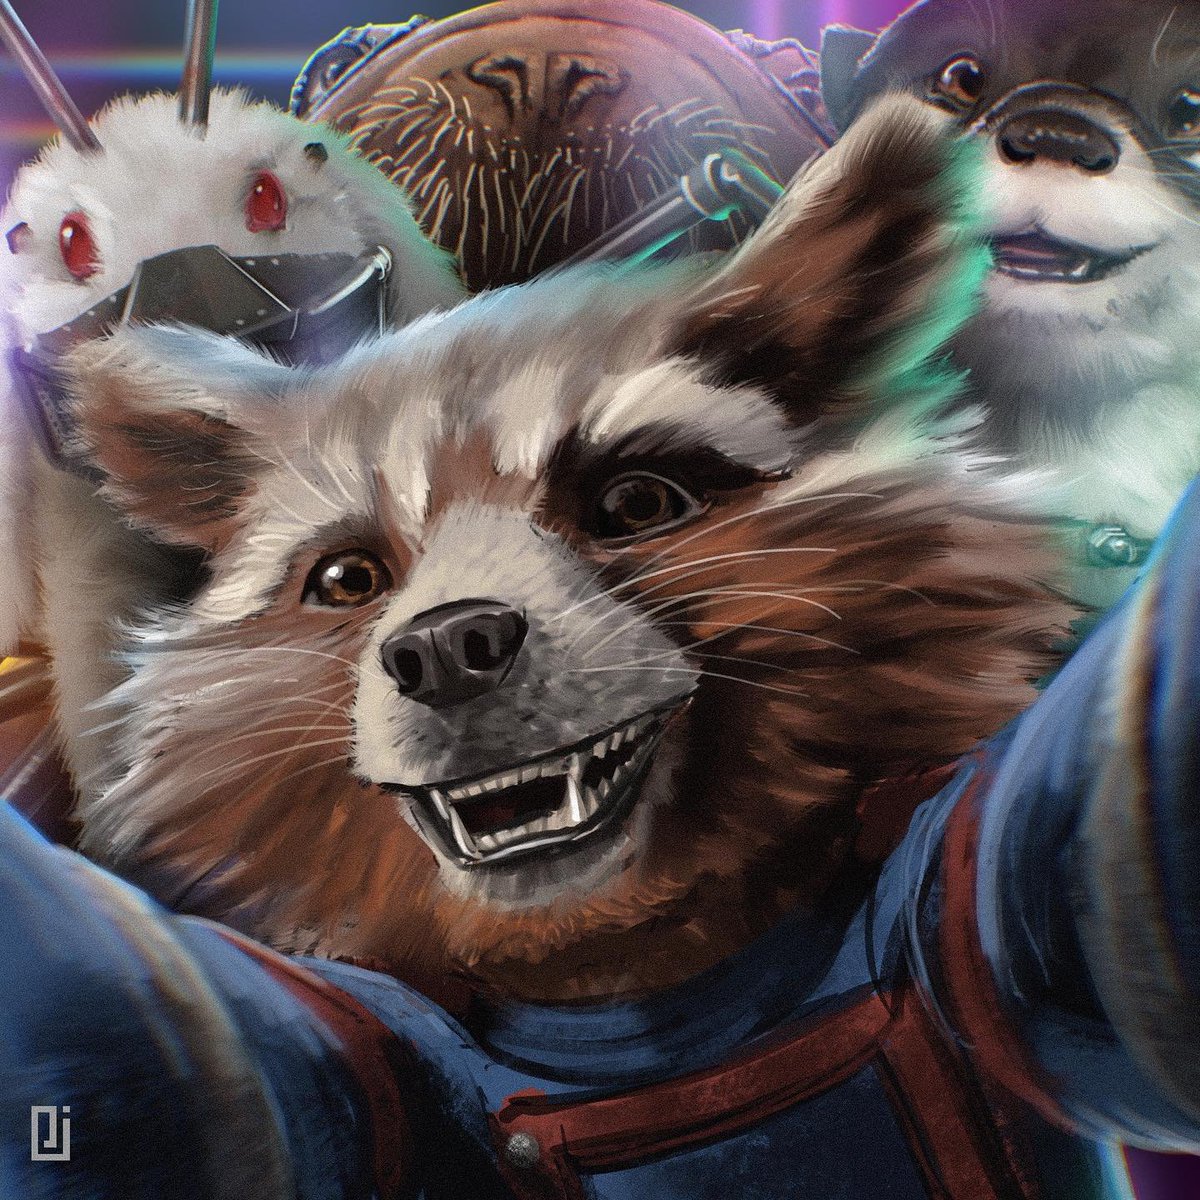 Is this the most adorable selfie ever? 😍
#RocketRaccoon #GuardiansOfTheGalaxyVol3